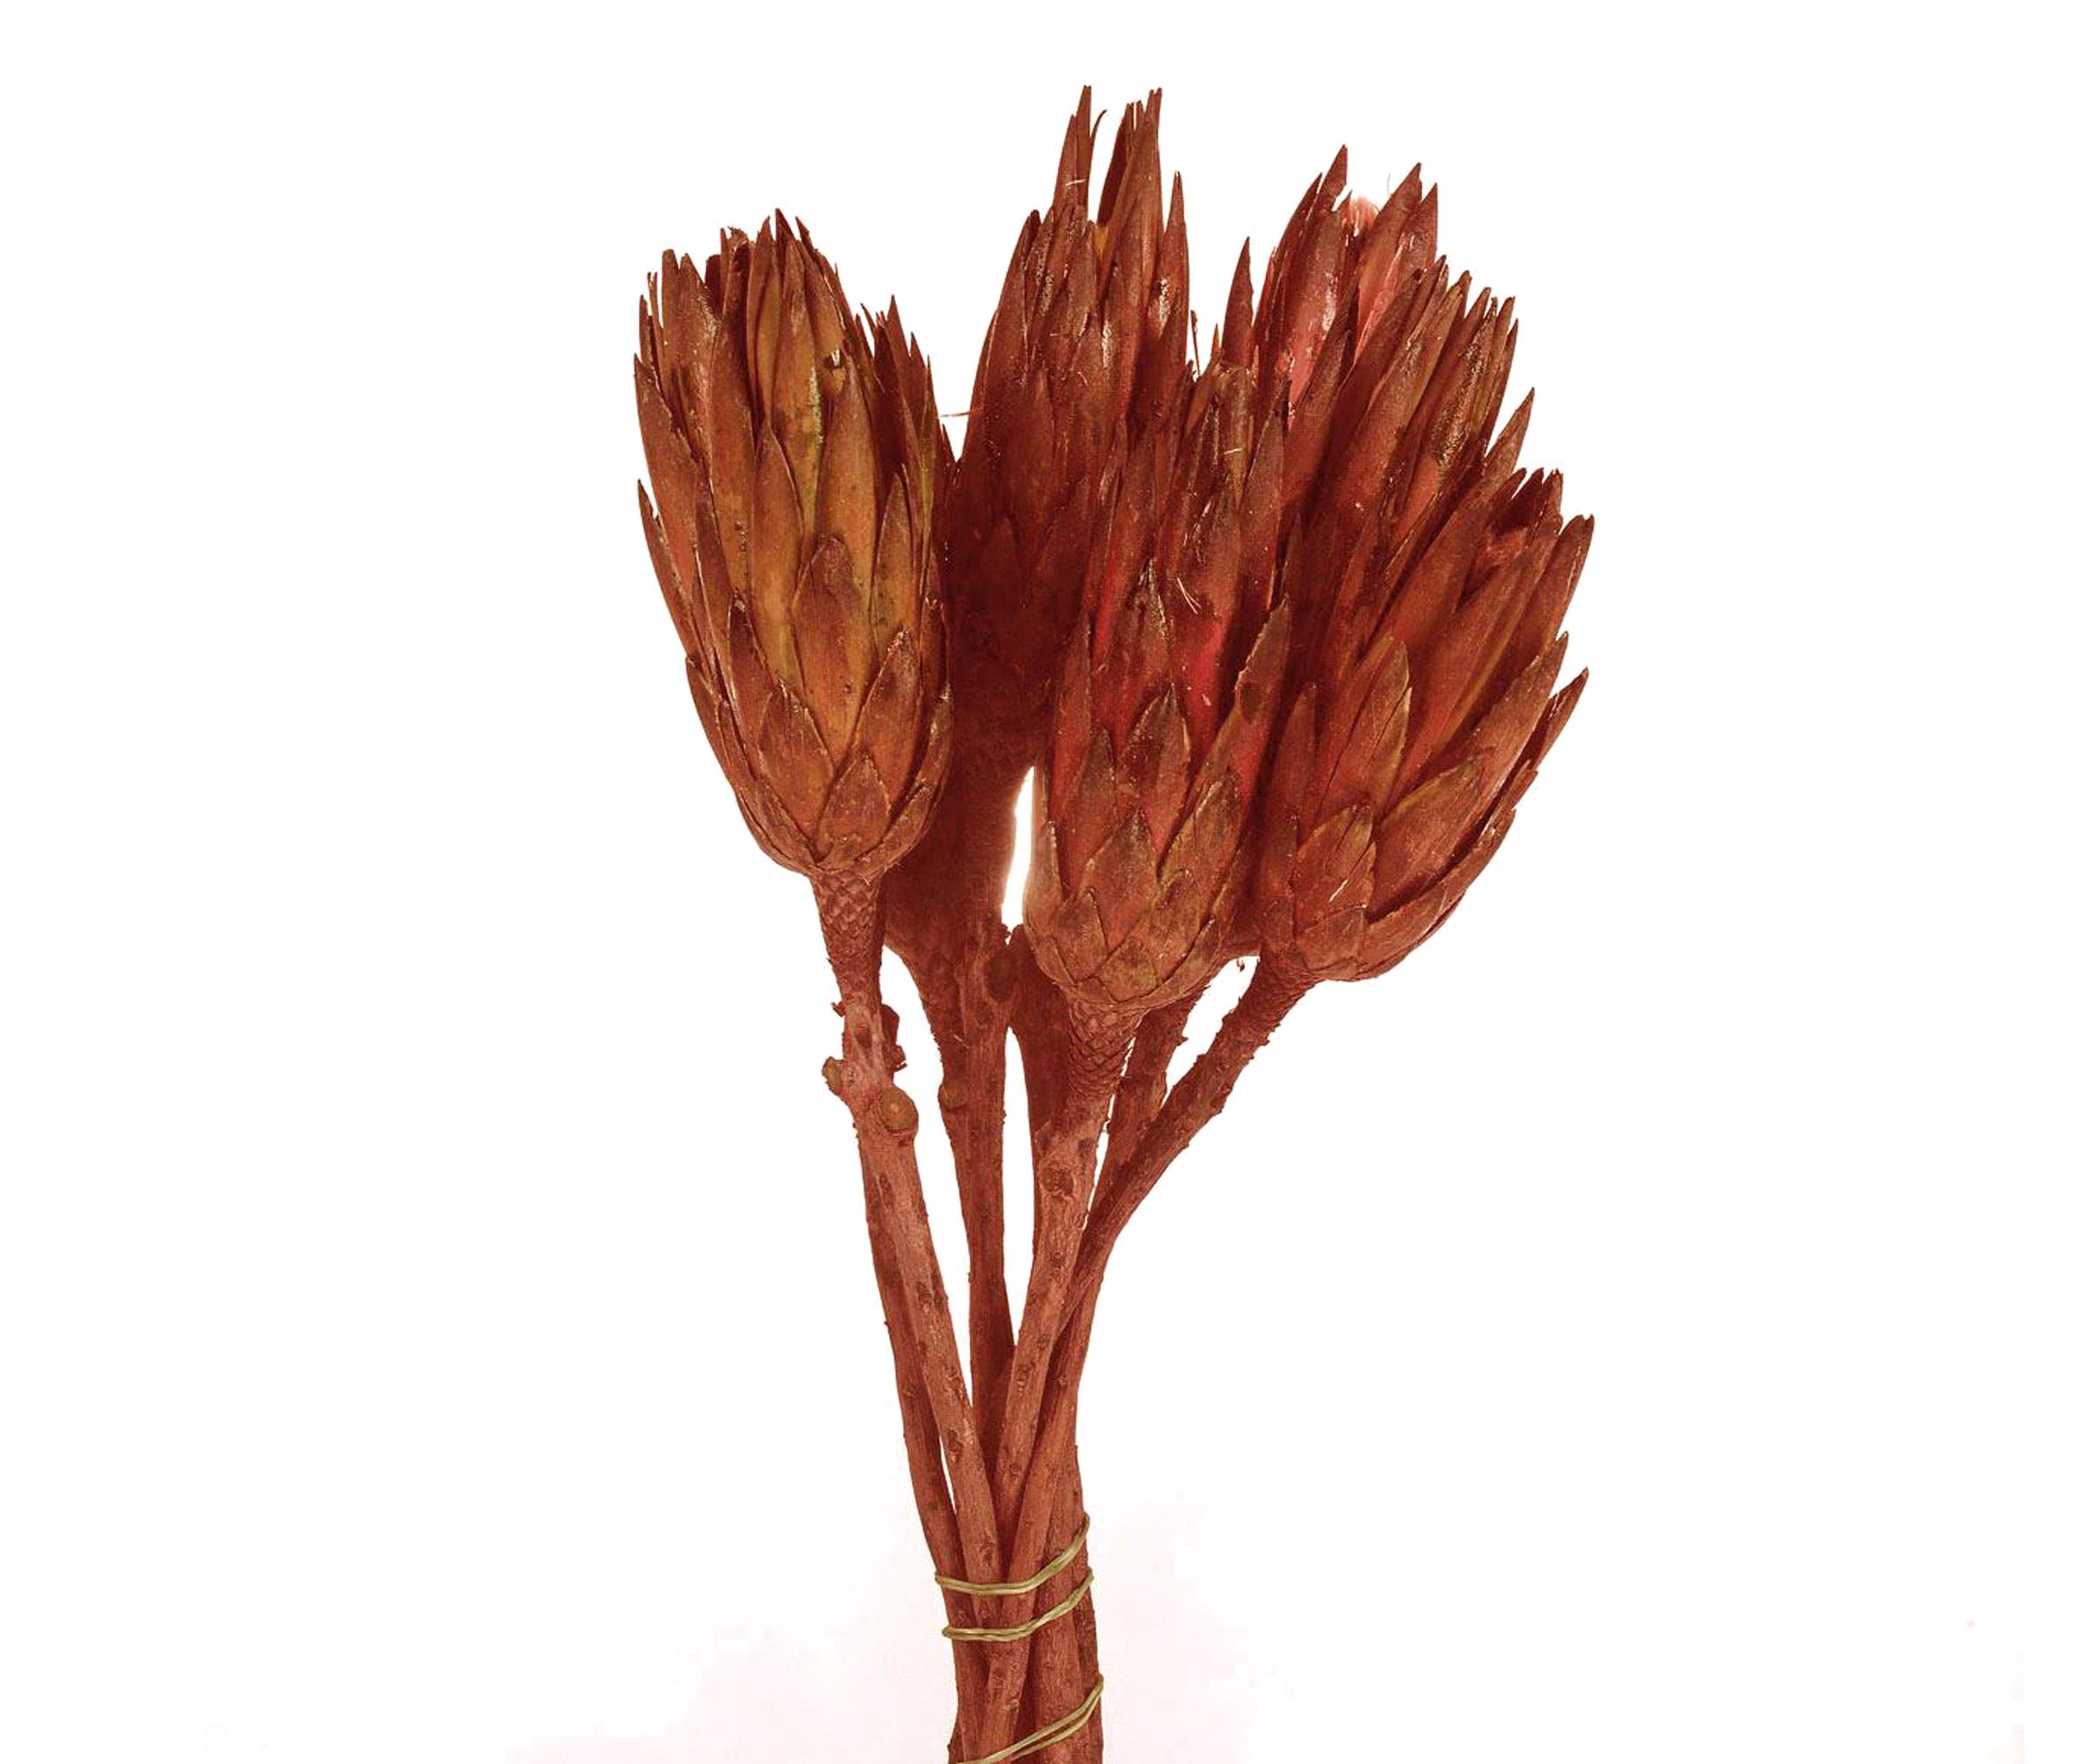 NATURAL PRODUCTS DRIED FLOWERS AND ERBS, EXOTICS AND DECORATION, REPENS COLORATA 1 PZ 30 CM